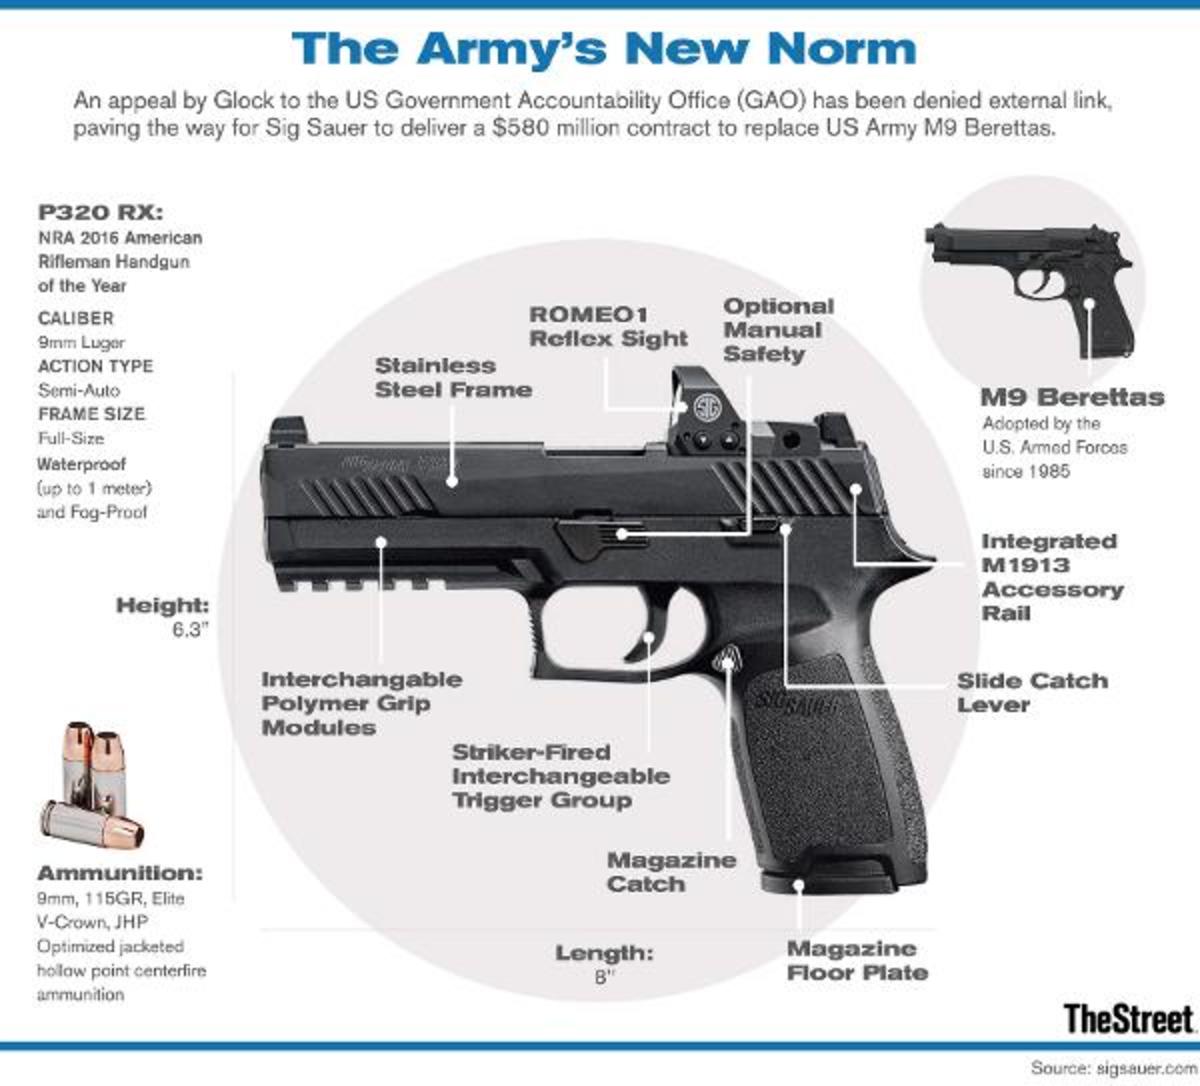 This Is the New Army Standard Issue Pistol, Just So You Know